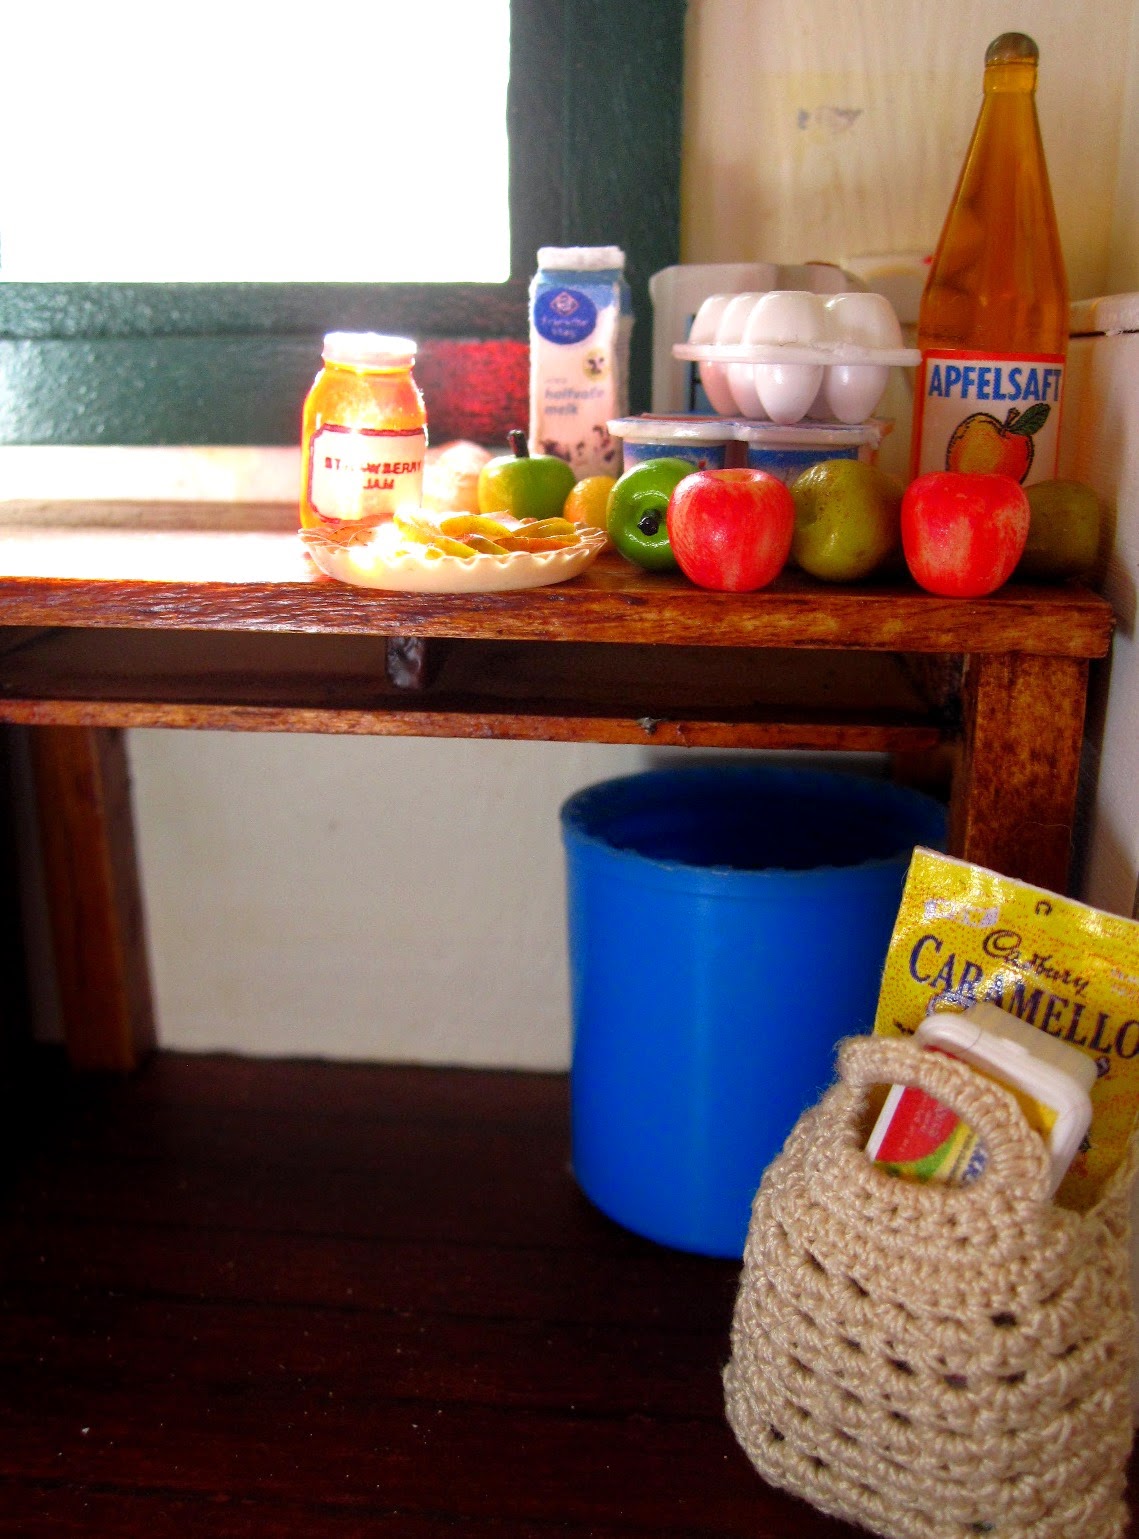 Inside of a miniature holiday house, showing a table with a selection of miniature grocery items, and a bag of groceries is on the floor underneath,